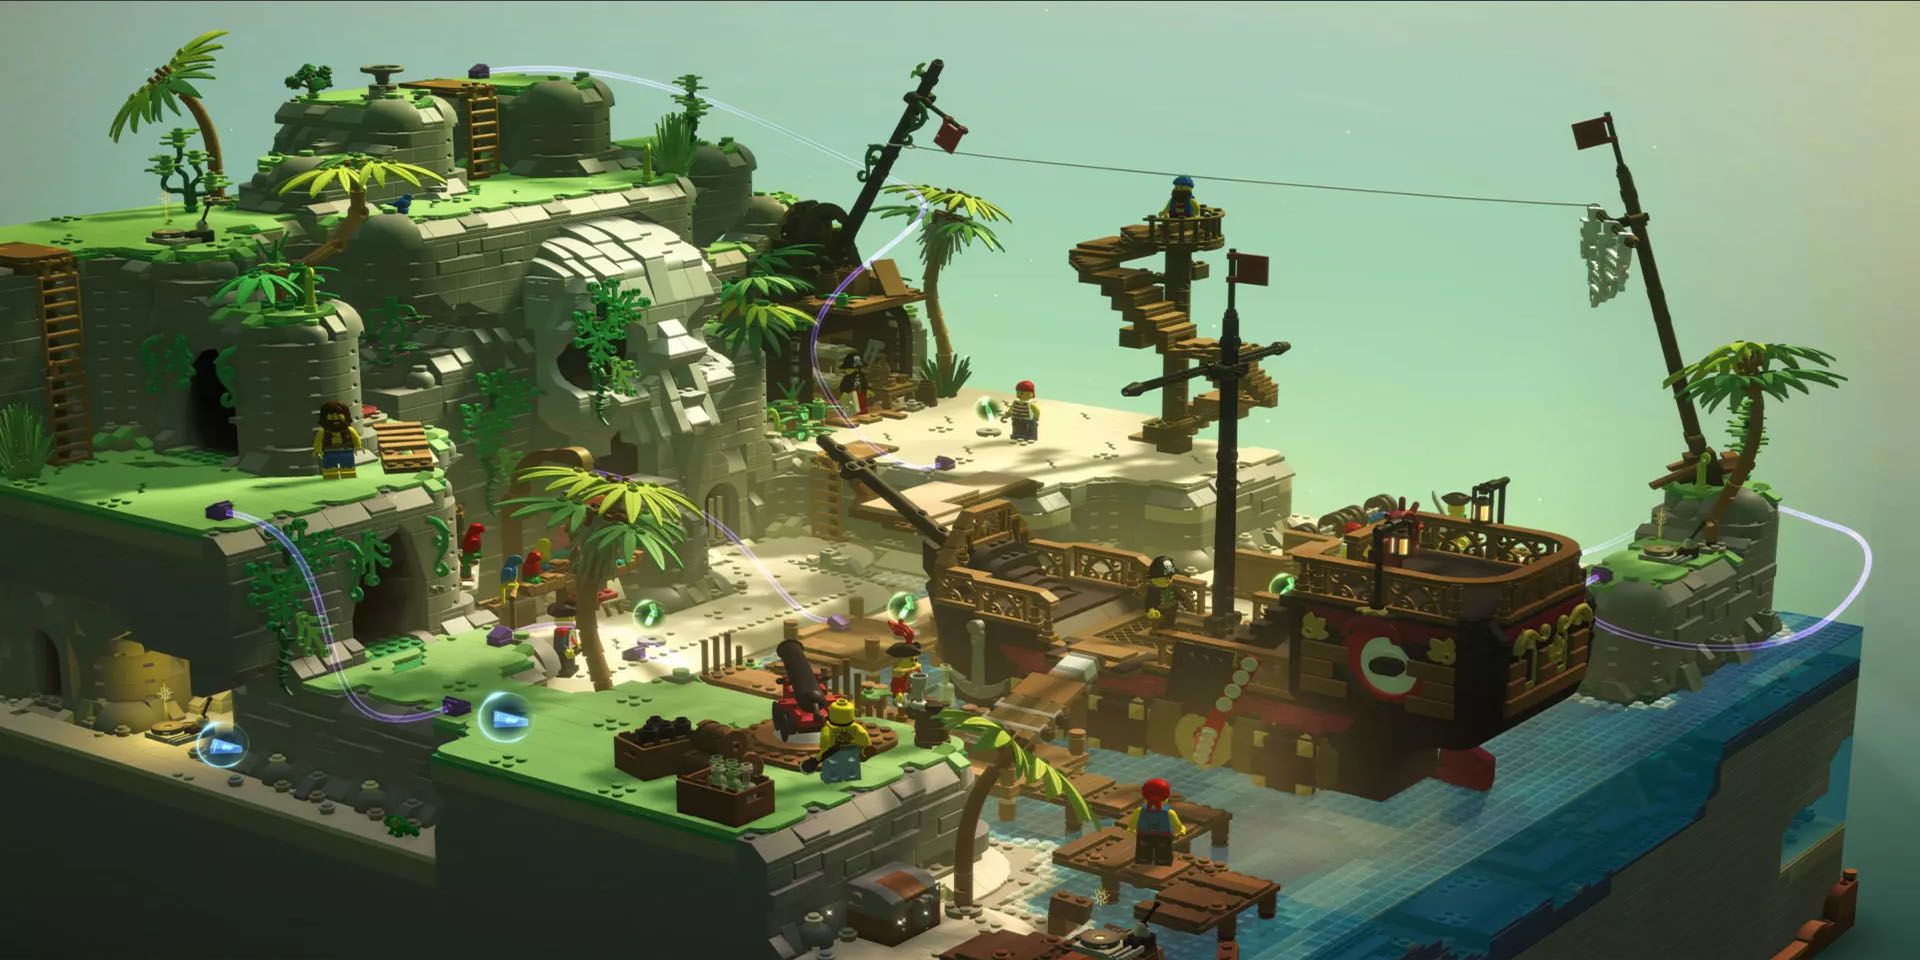 An isometric Lego Bricktales pirate-themed island featuring player creations such as staircases and a pirate boat